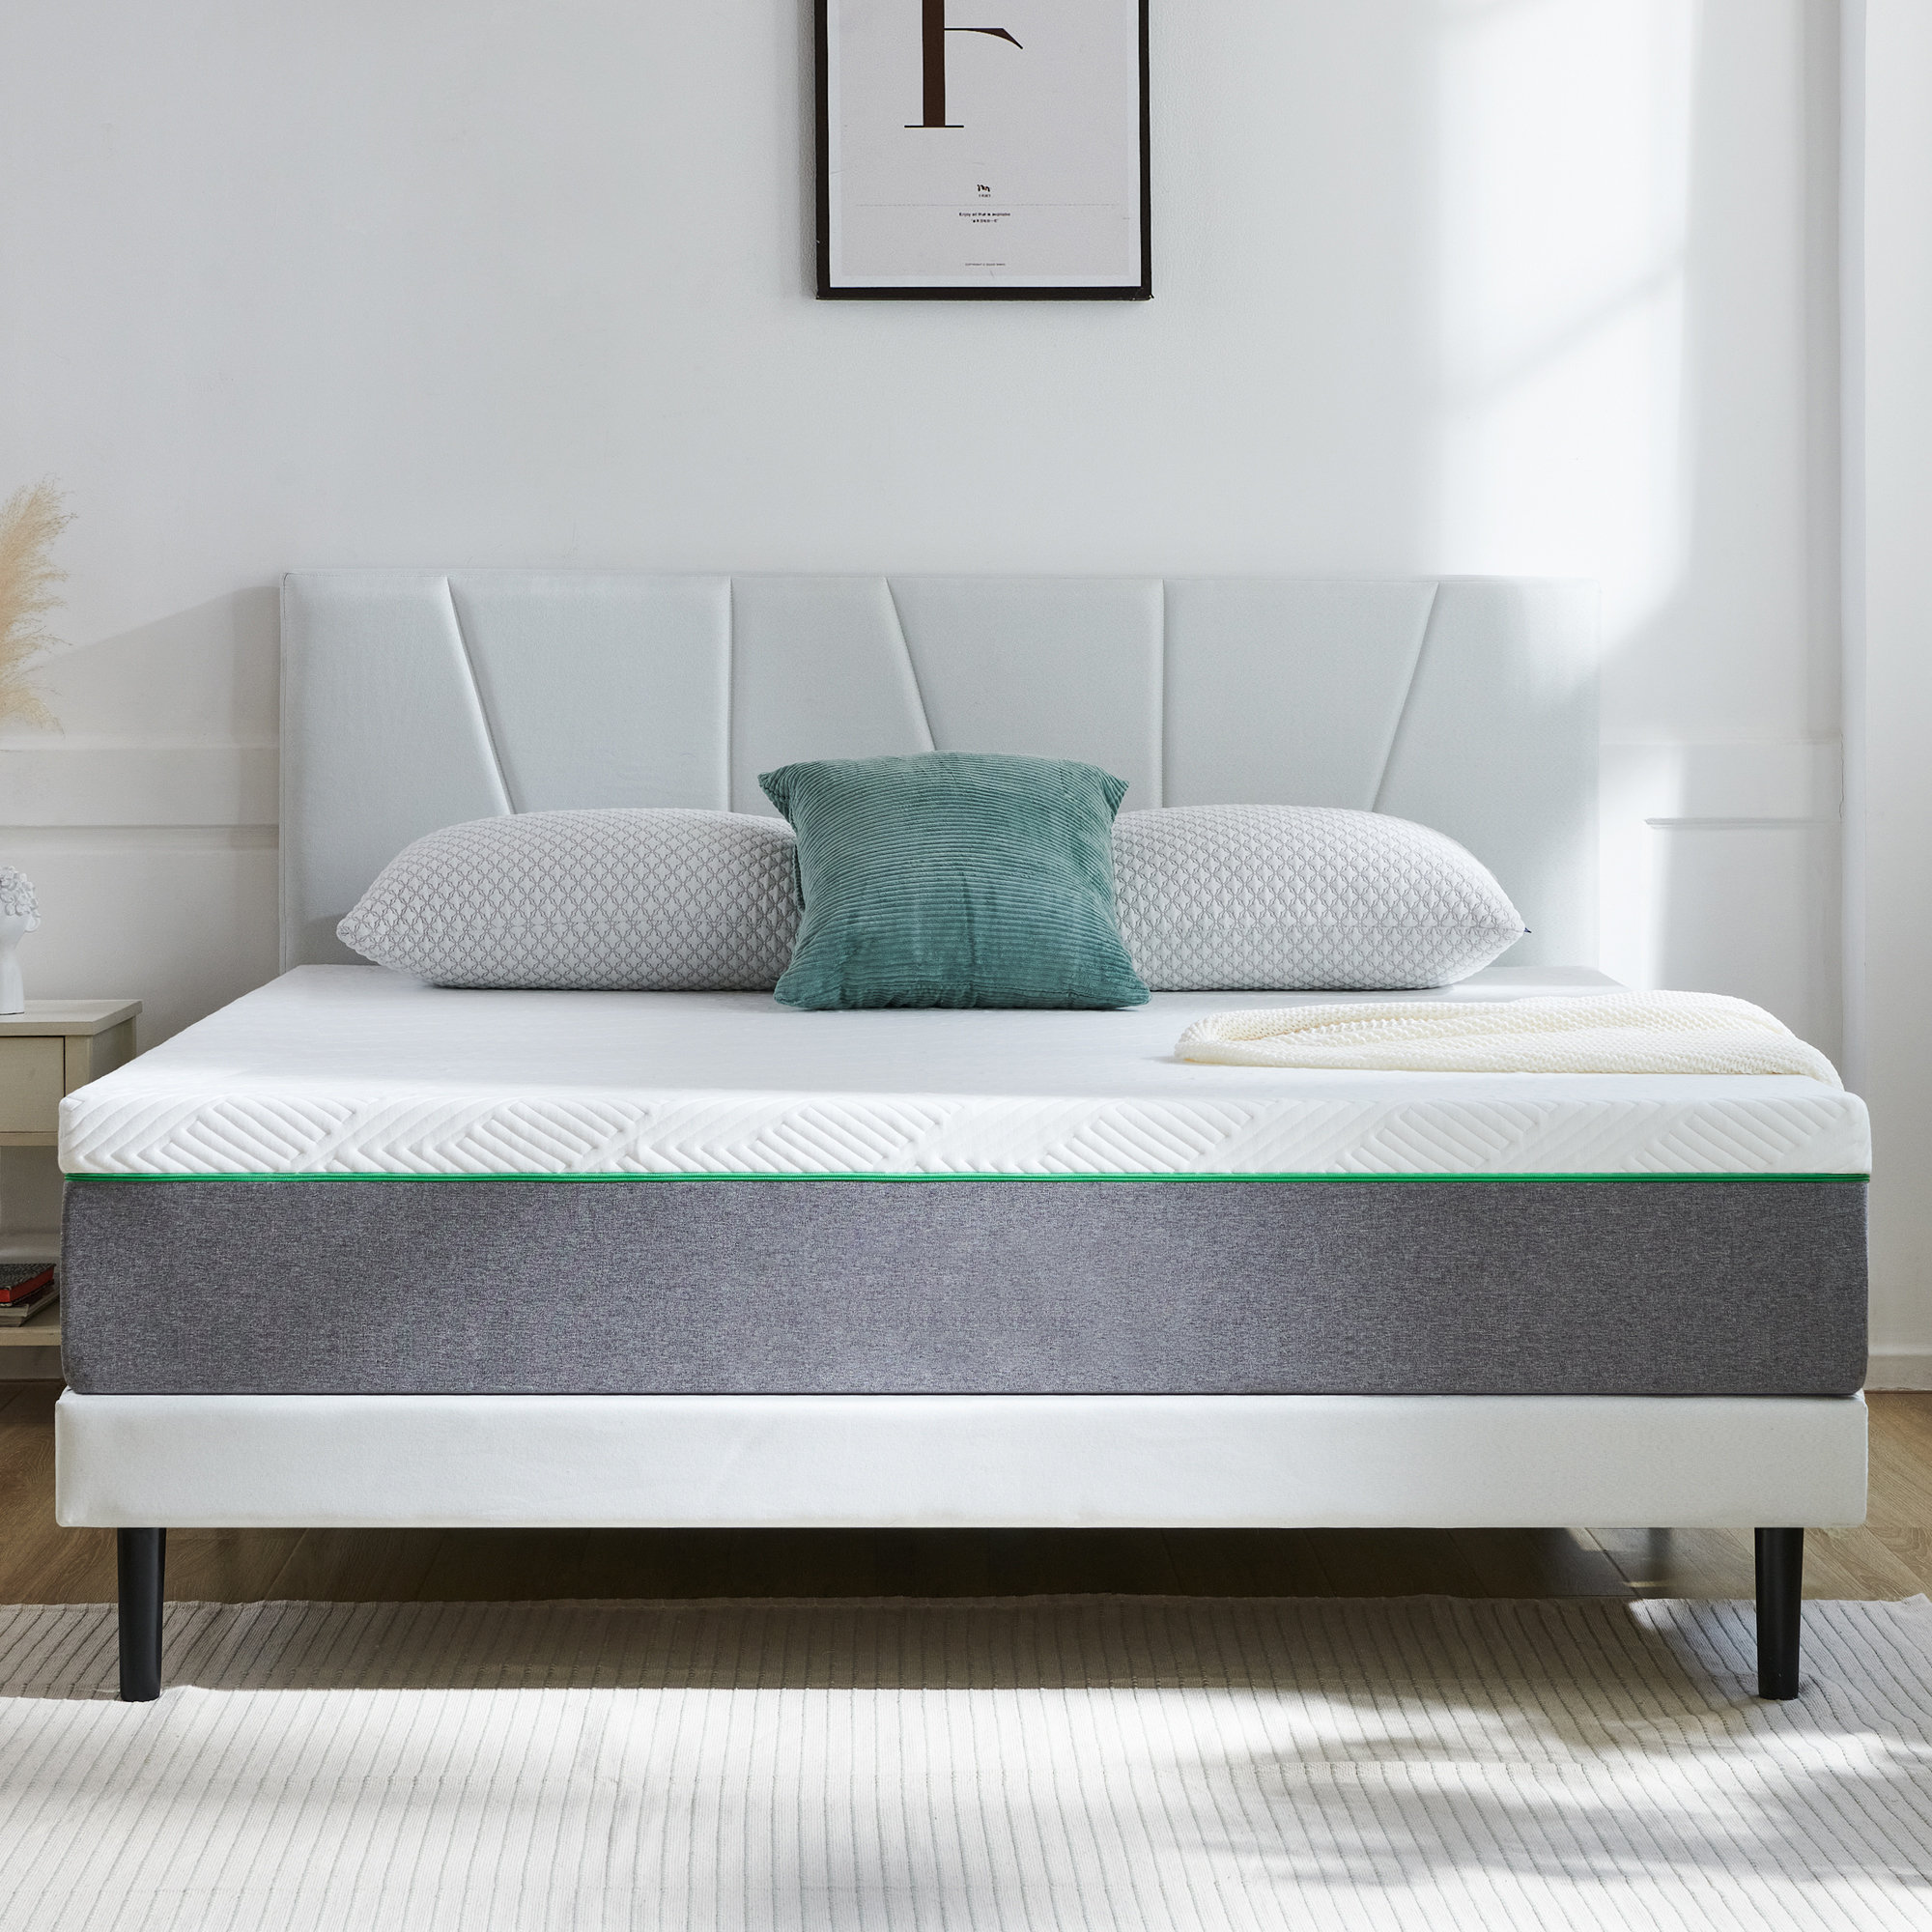 Easy-to-install Sheet Holders For Mattresses - Keep Sheets